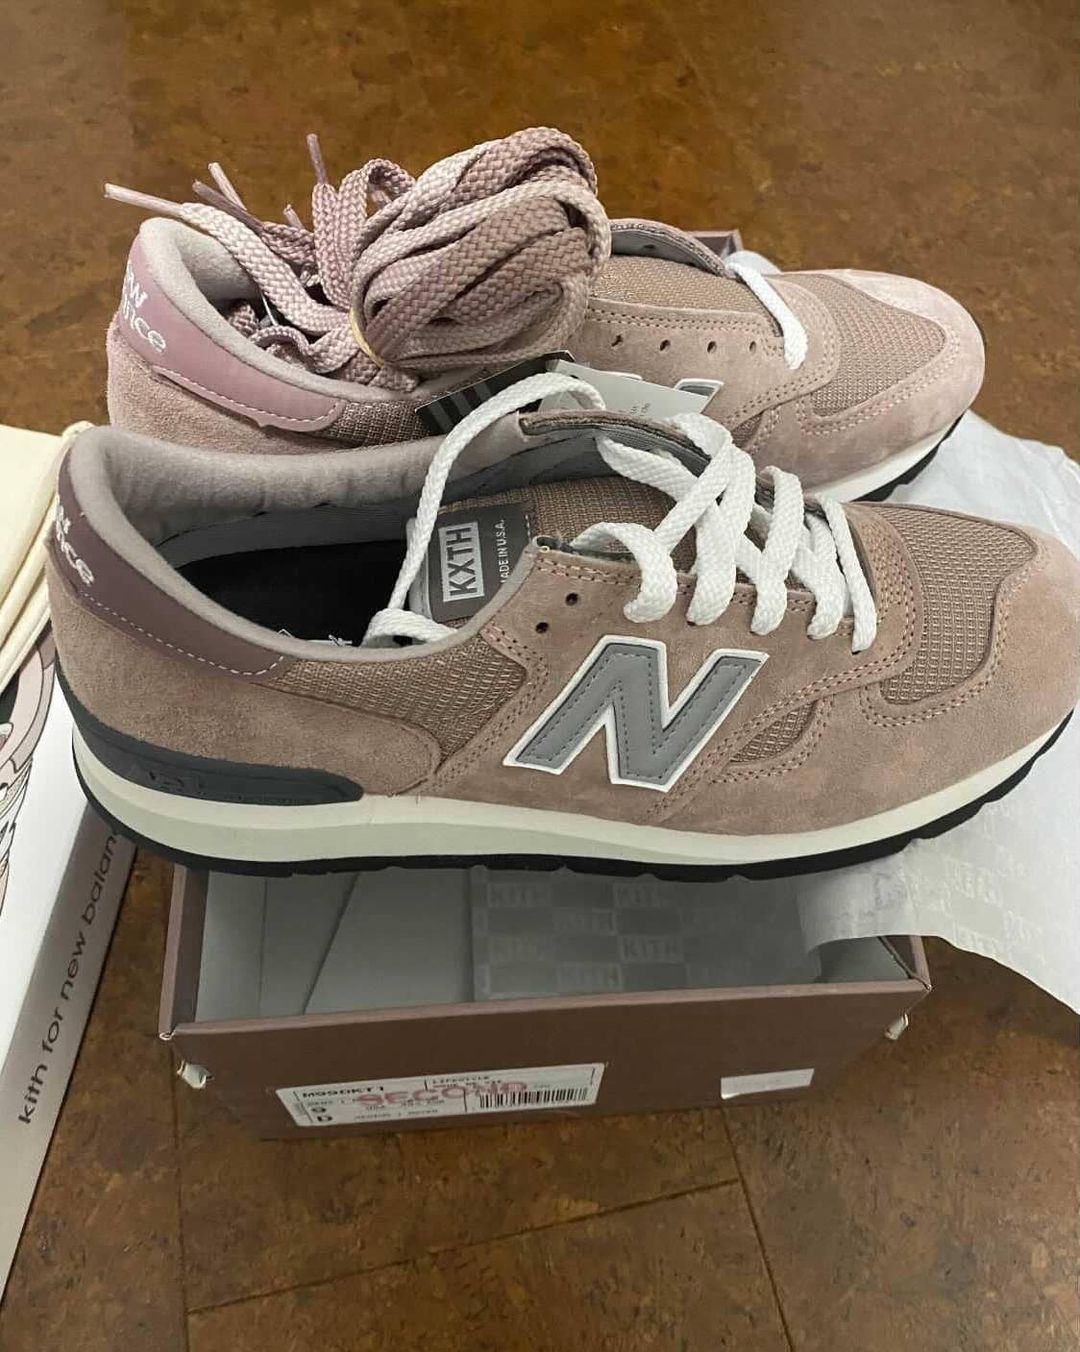 First Look: Kith x New Balance 990v1 “Dusty Rose”